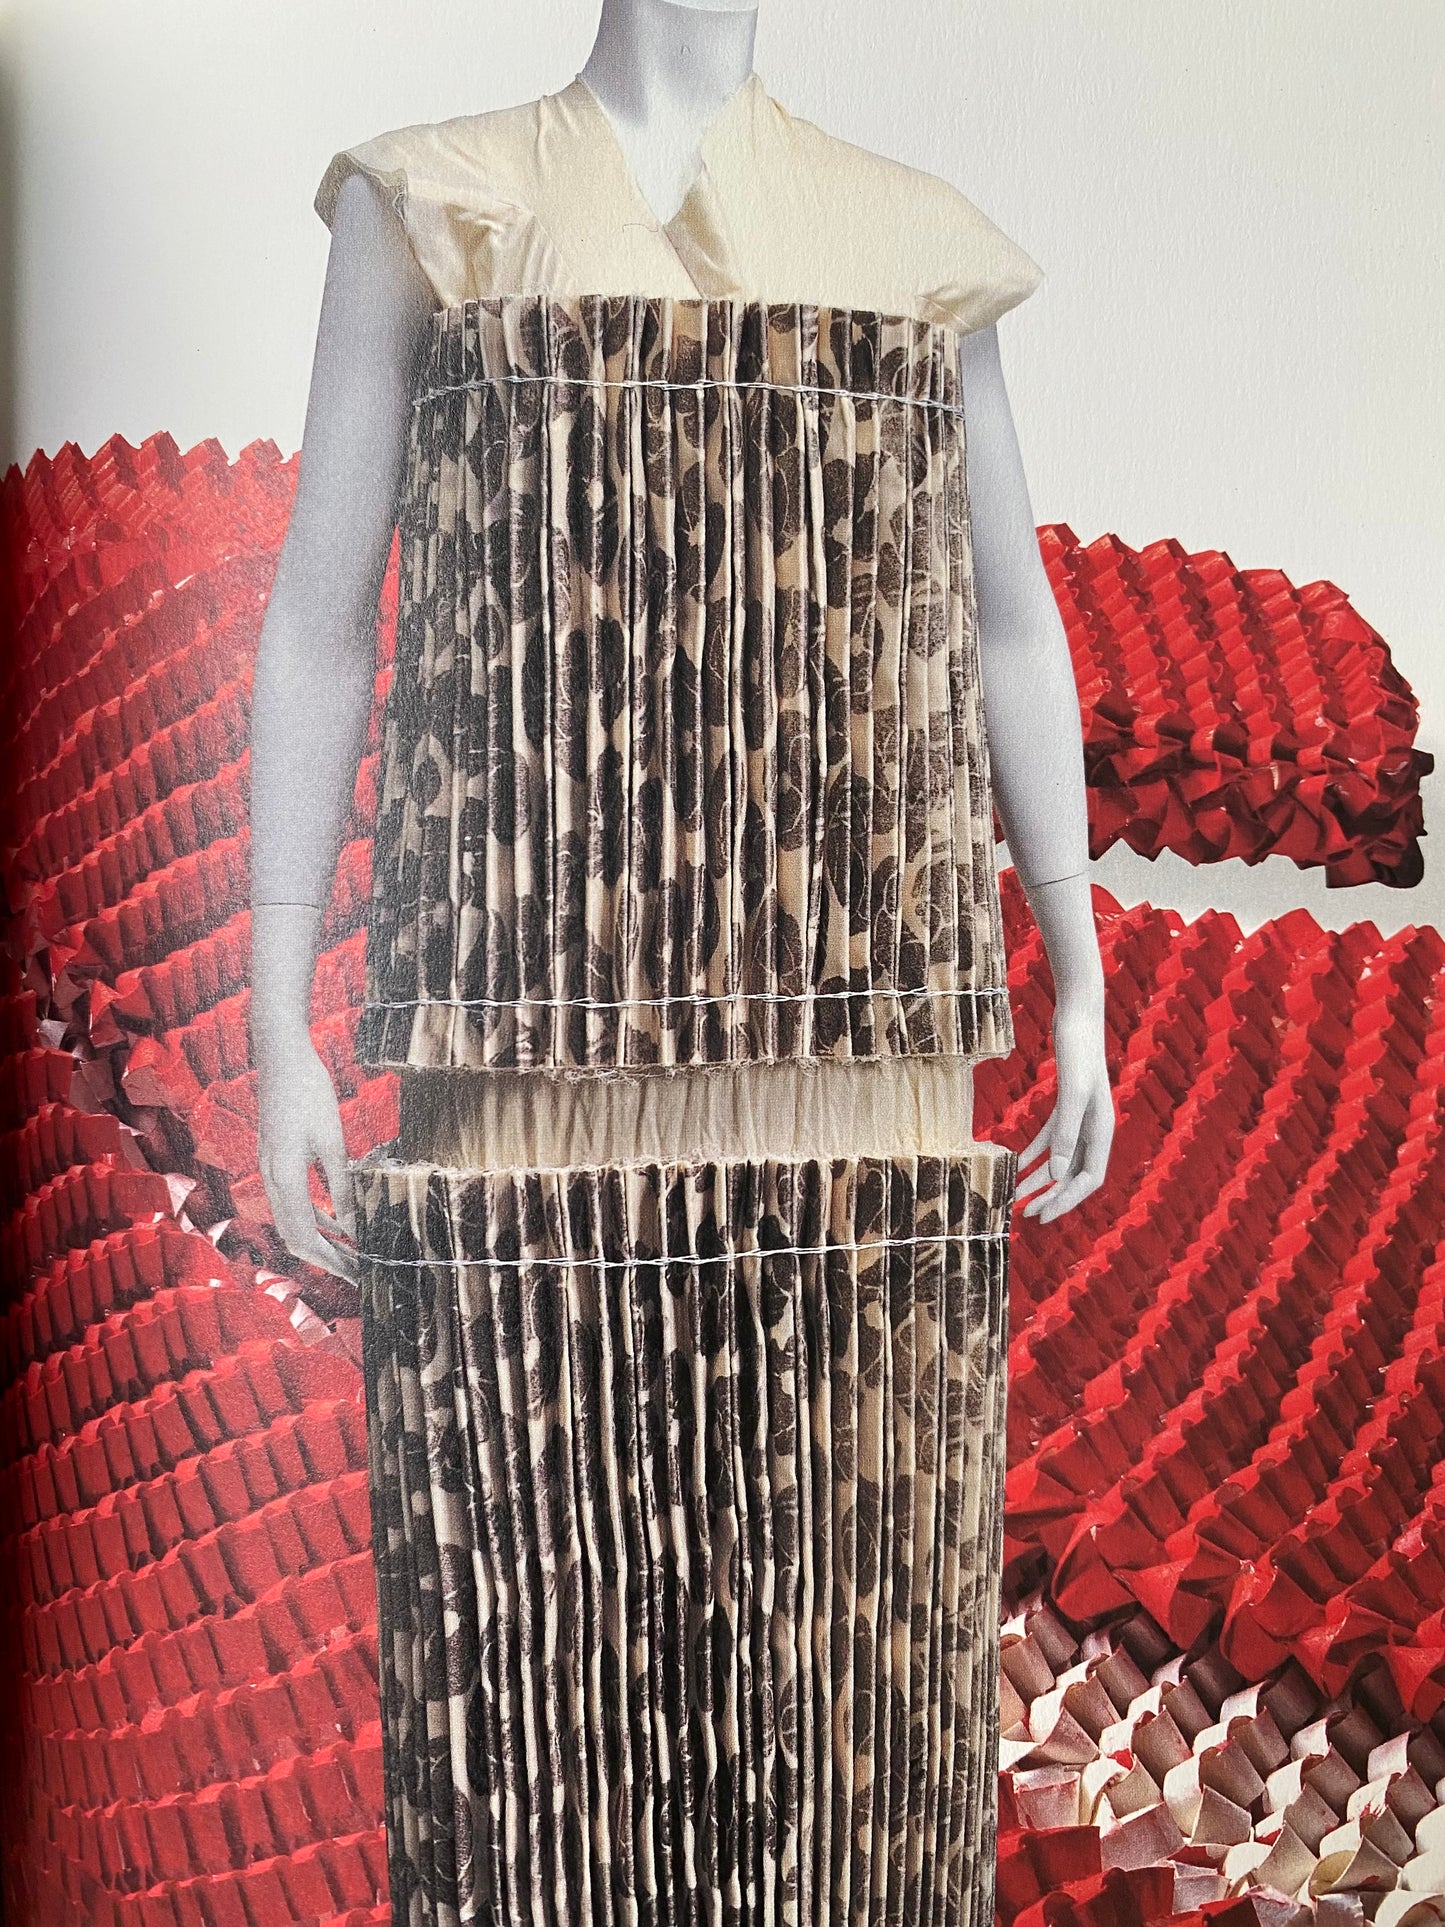 Visions Of The Body: Fashion Or Invisible Corset (1999)